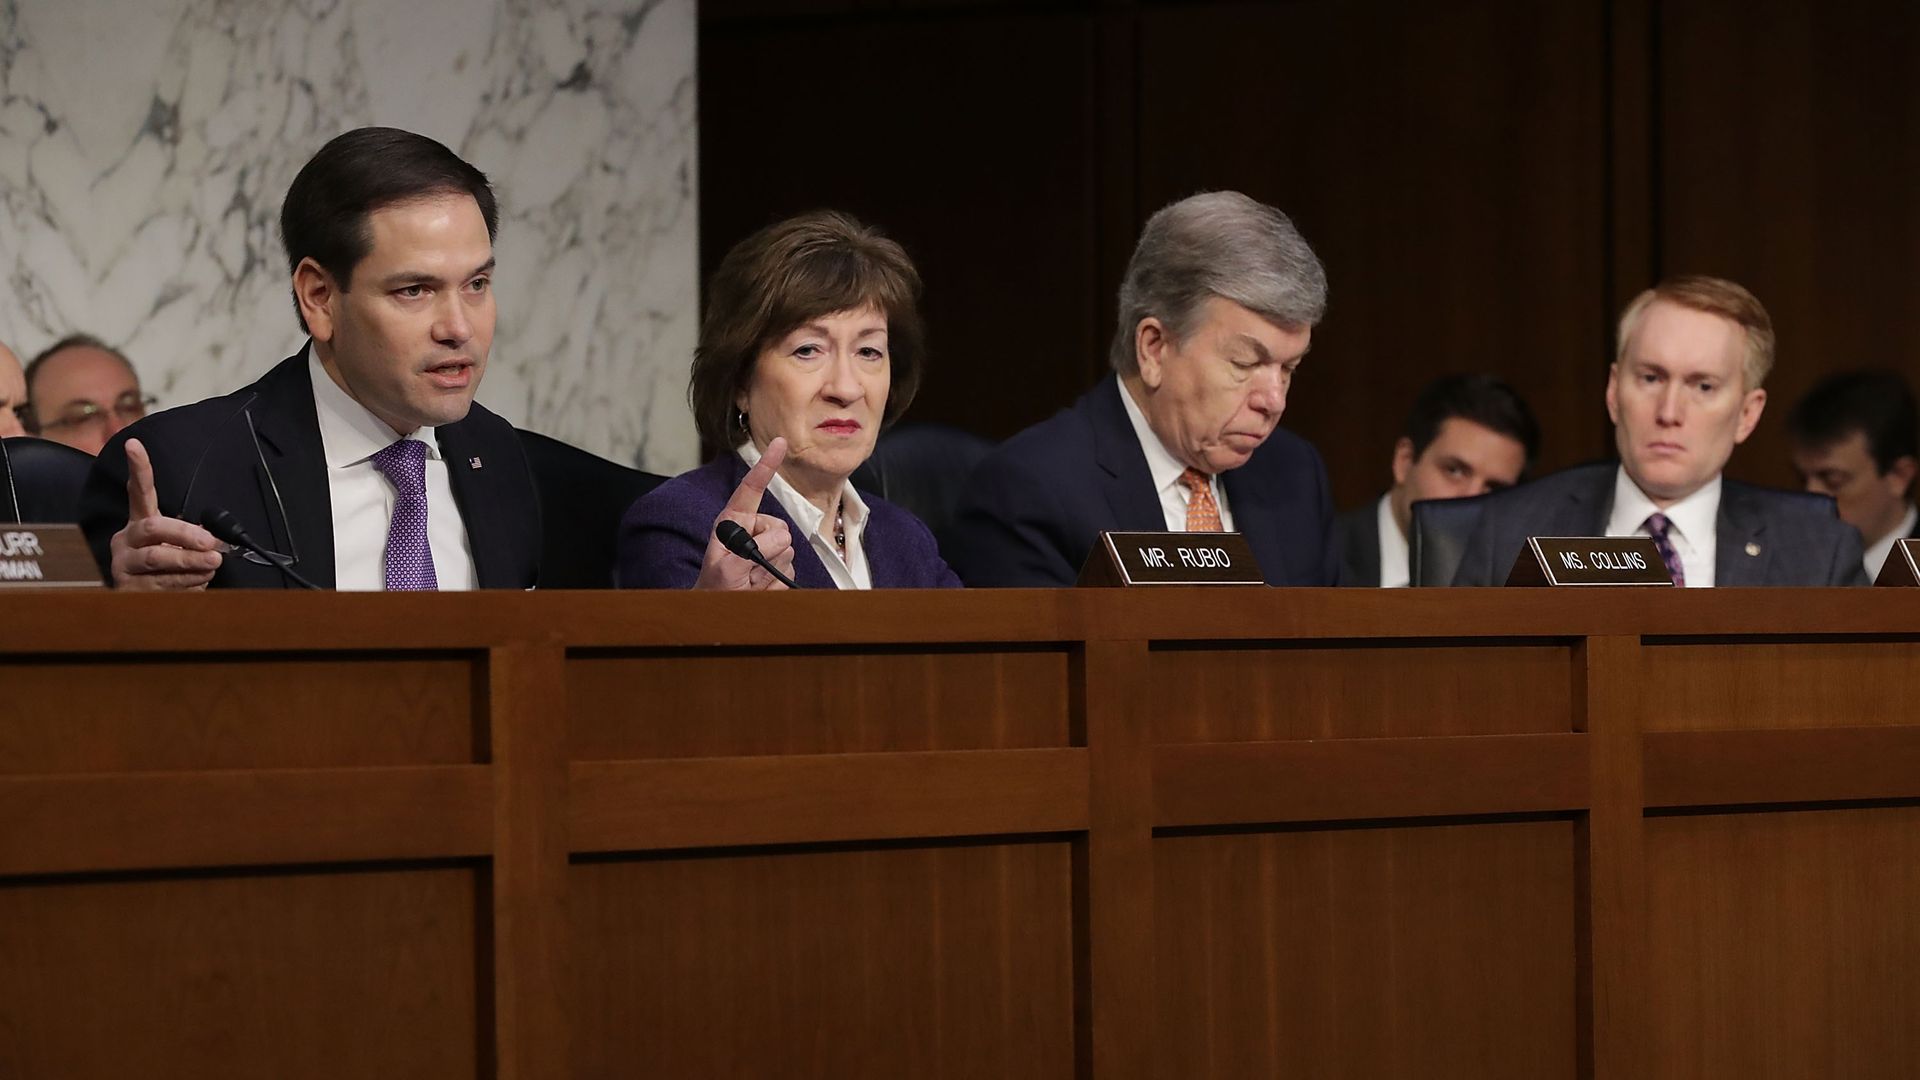 Senate Intelligence Committee members Marco Rubio, Susan Collins and others preside over a hearing.